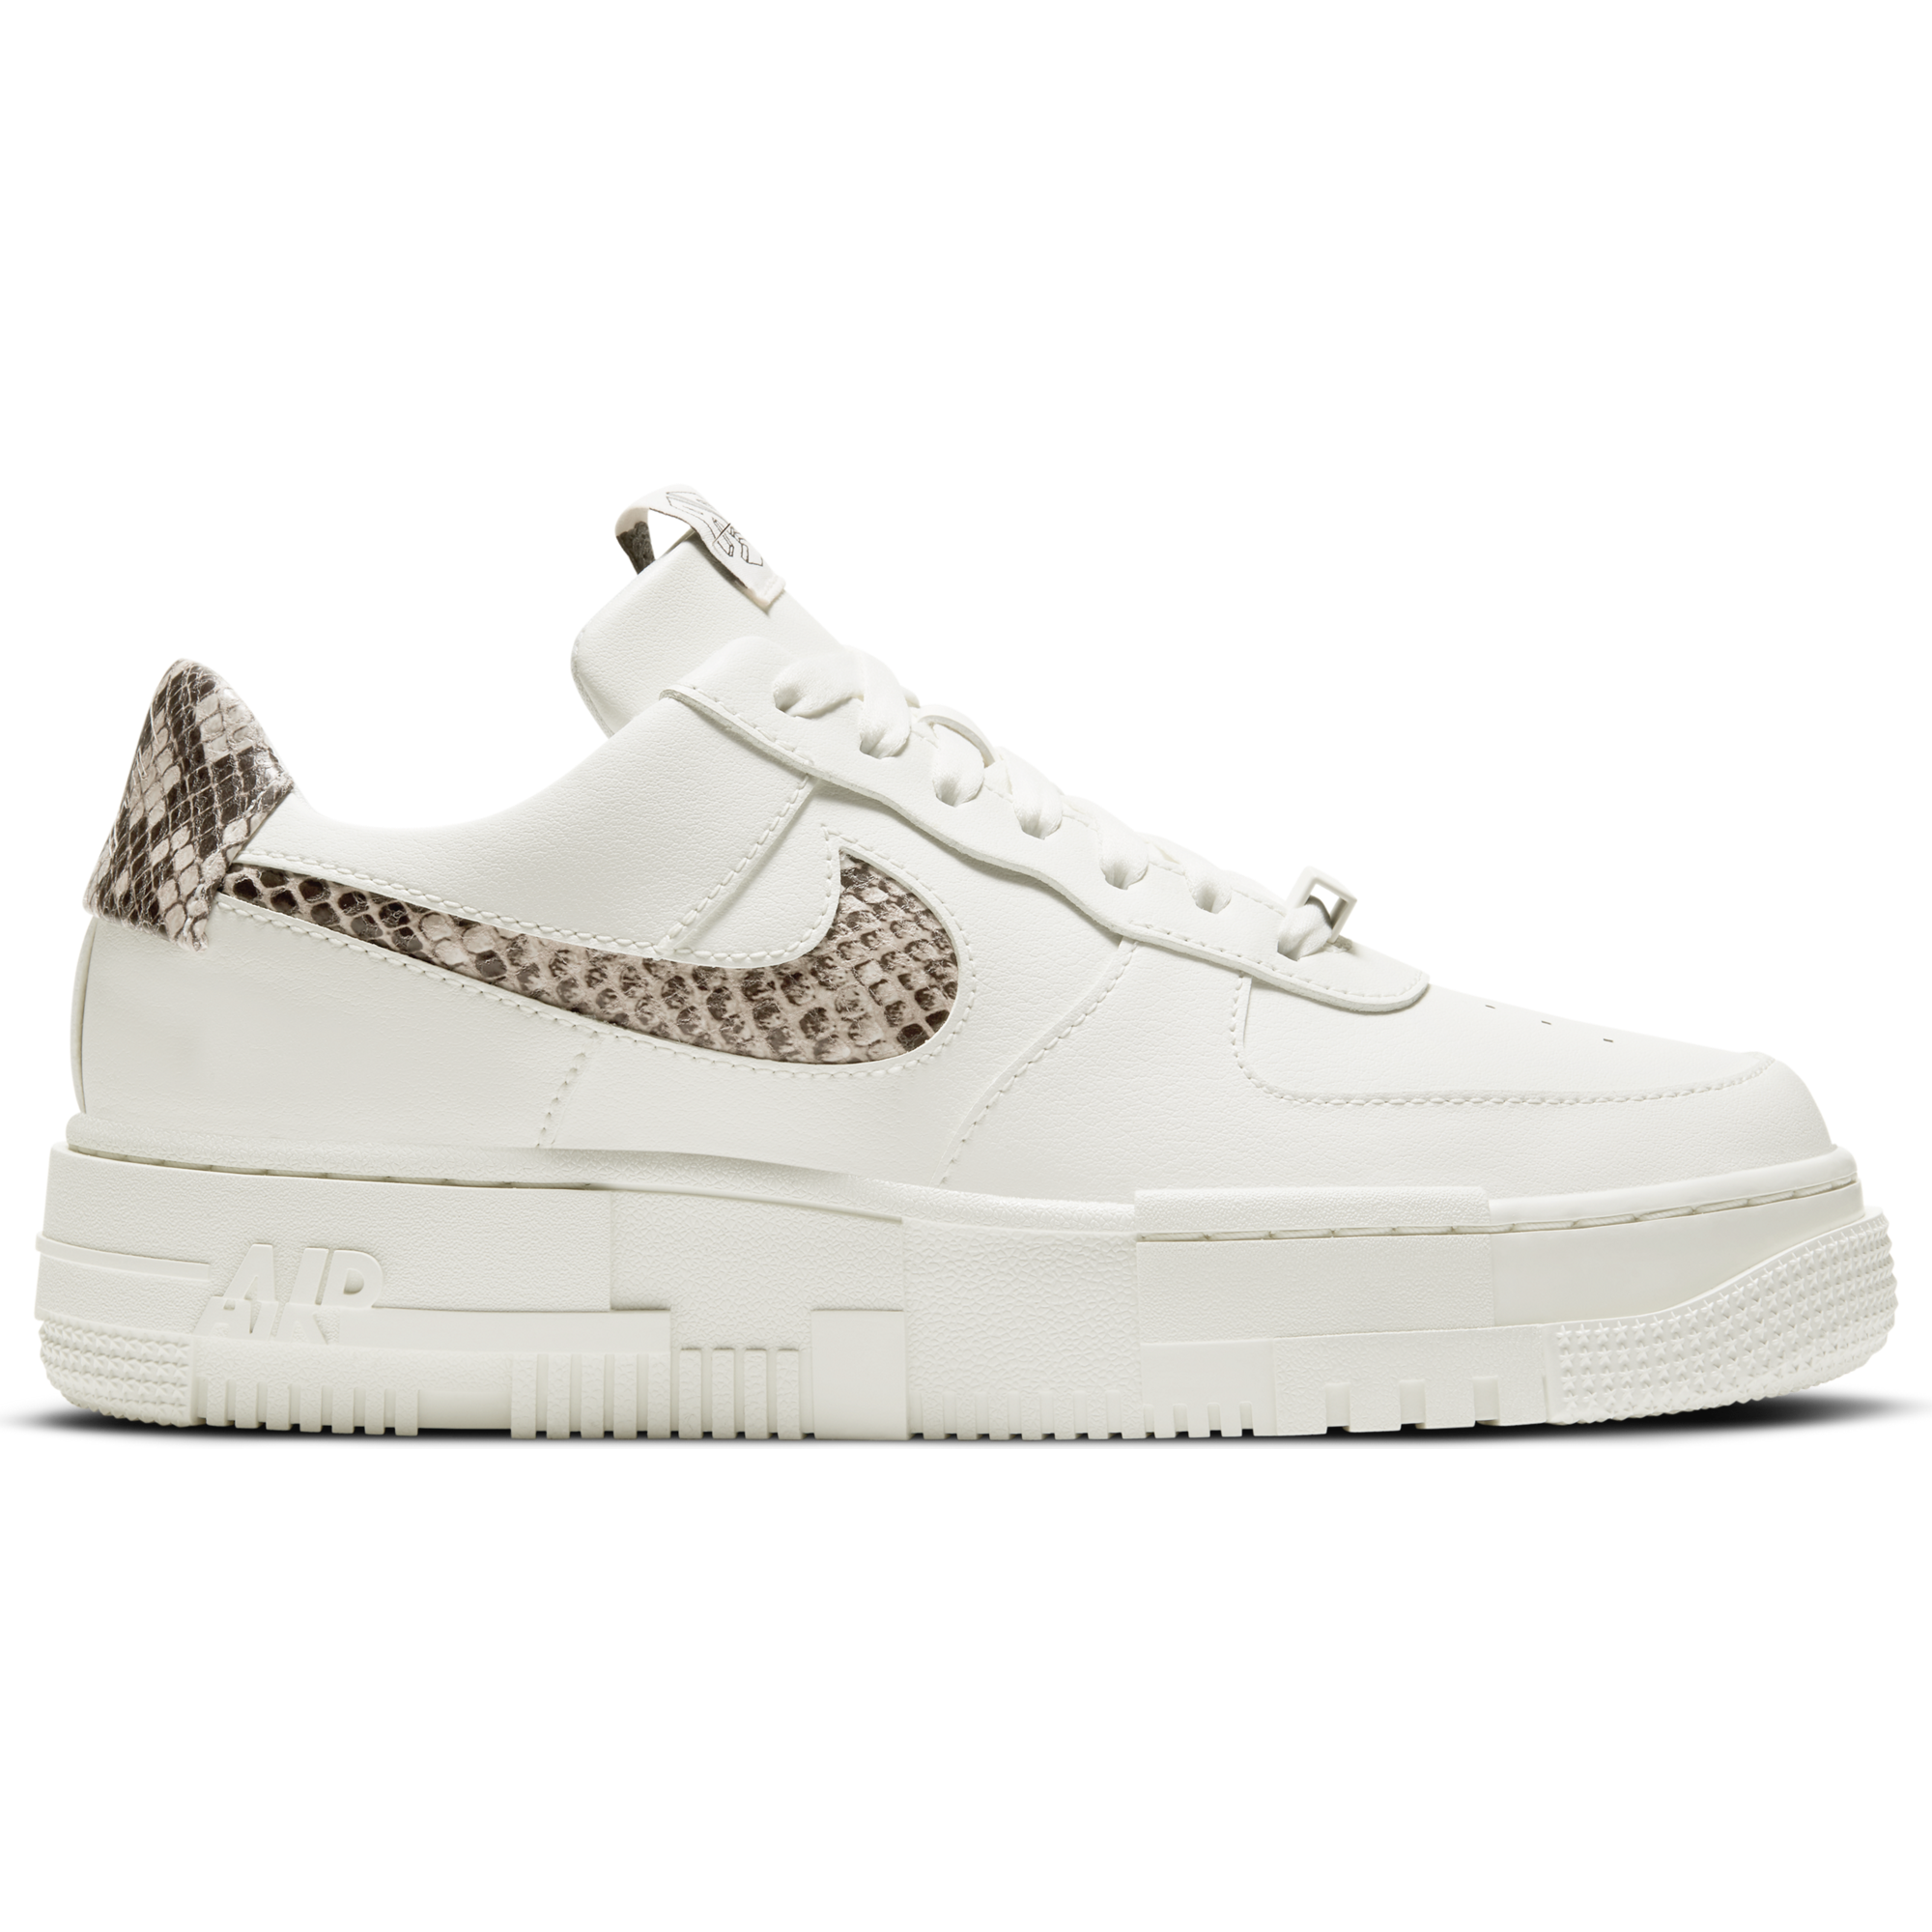 air force one pixel foot locker Promotions